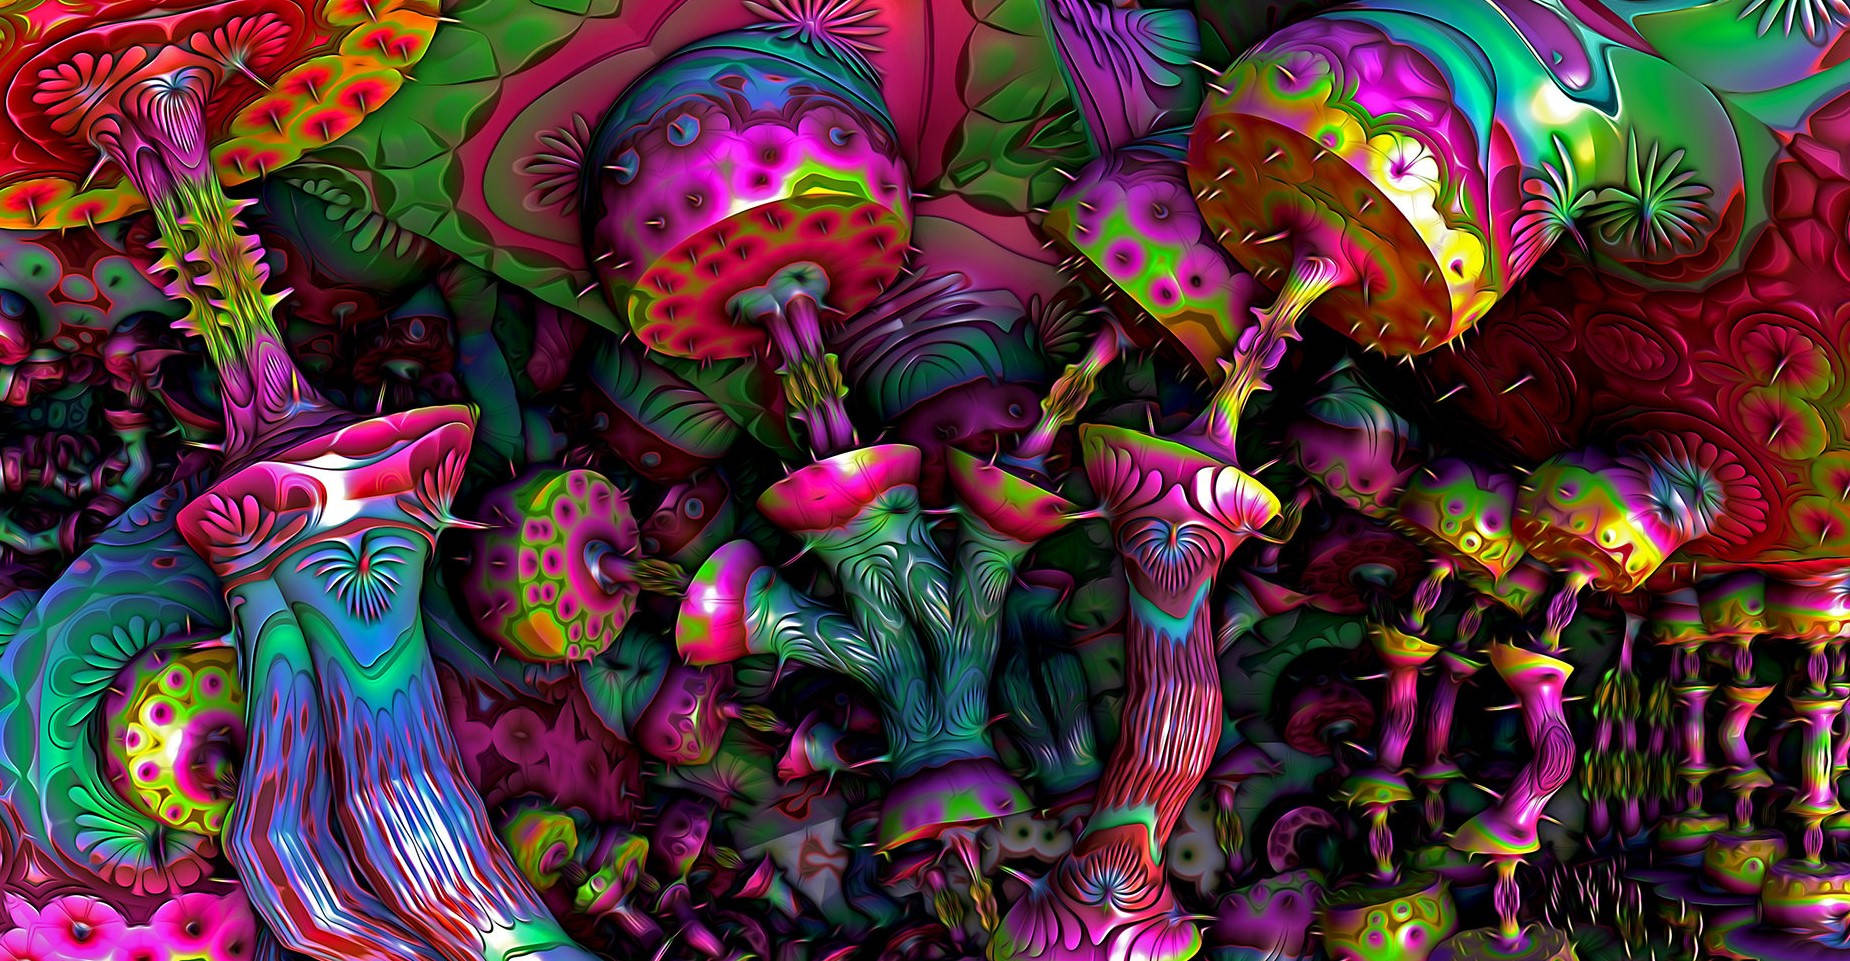 A Psychedelic Flushcap Fungus Wallpaper